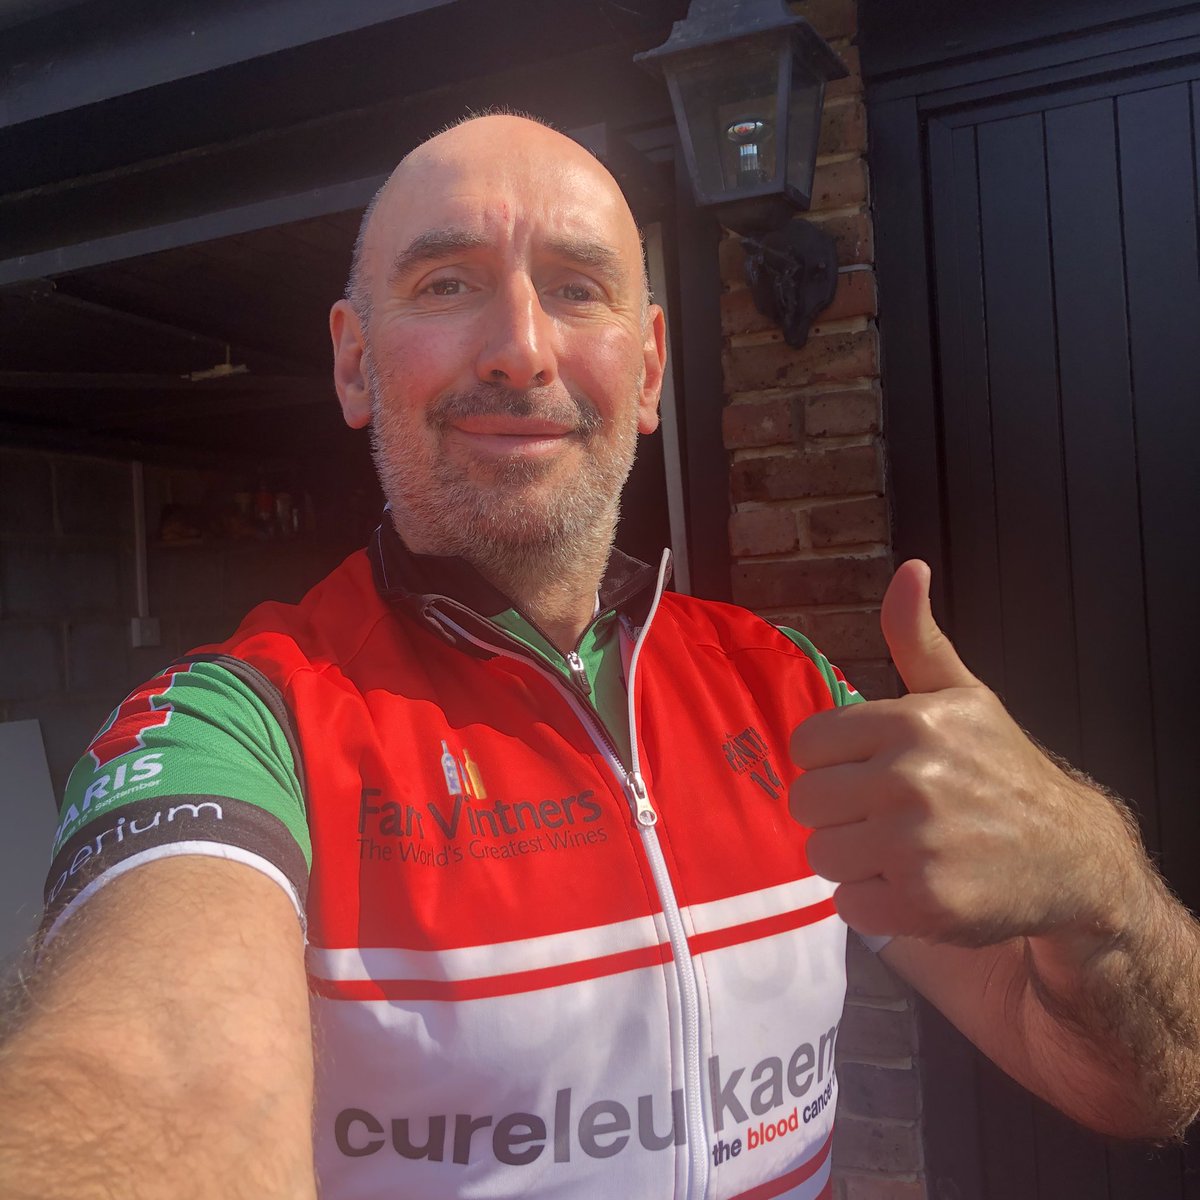 @CureLeukaemia #clfamily here we go 26 miles or bust... good luck to all doing their challenges @Mc73James @dominiq01575275 @ianhancock everybody be safe !  Will report back at end !